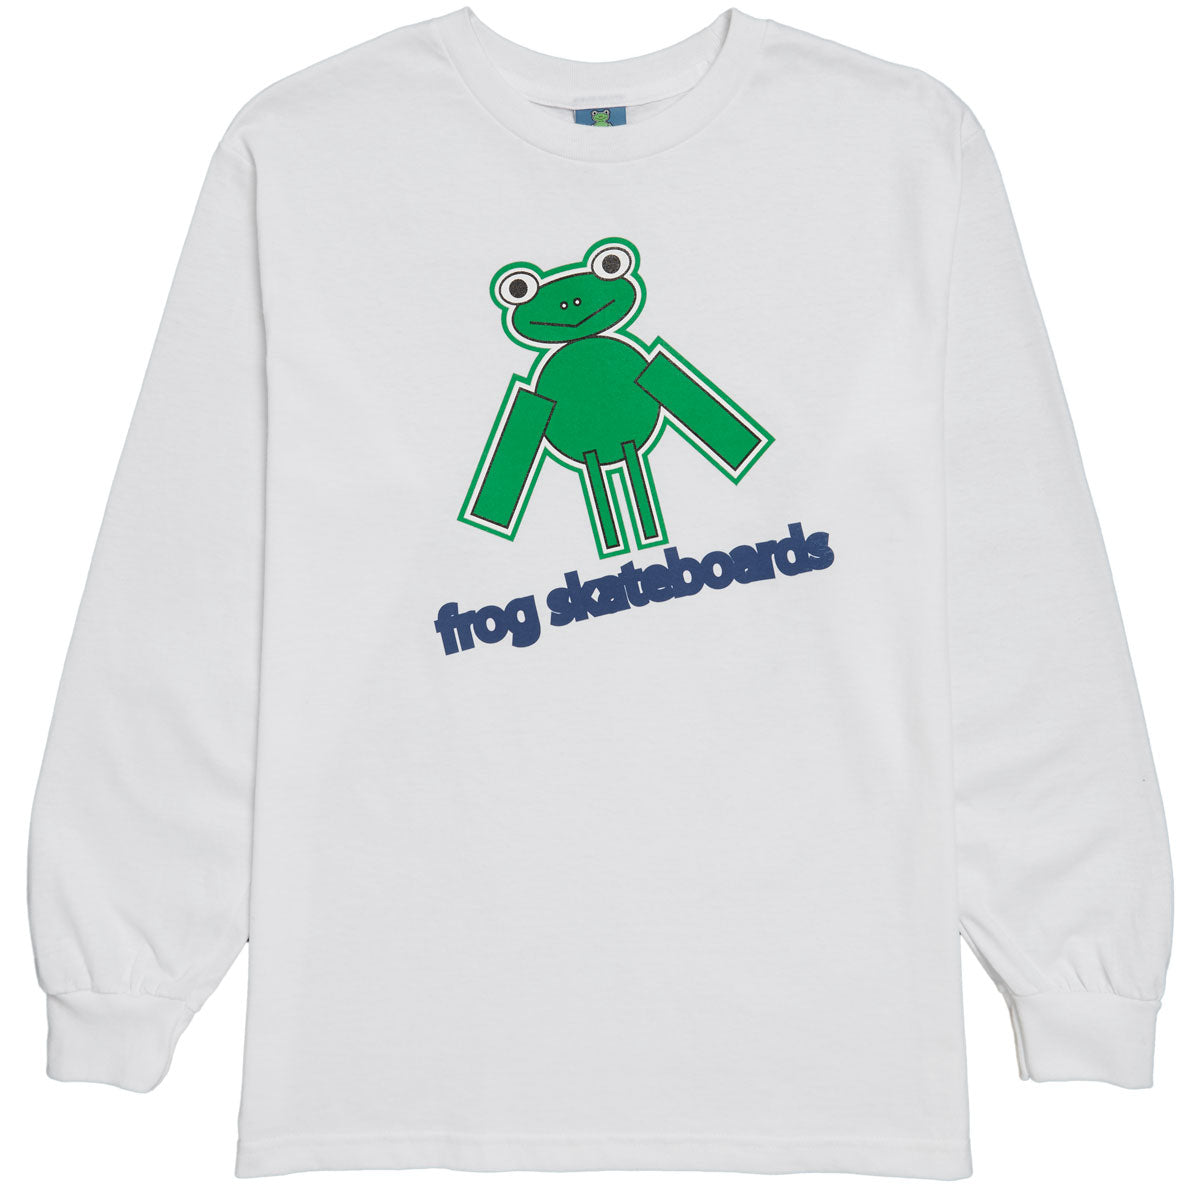 Frog Perfect Frog Long Sleeve T-Shirt - White image 1